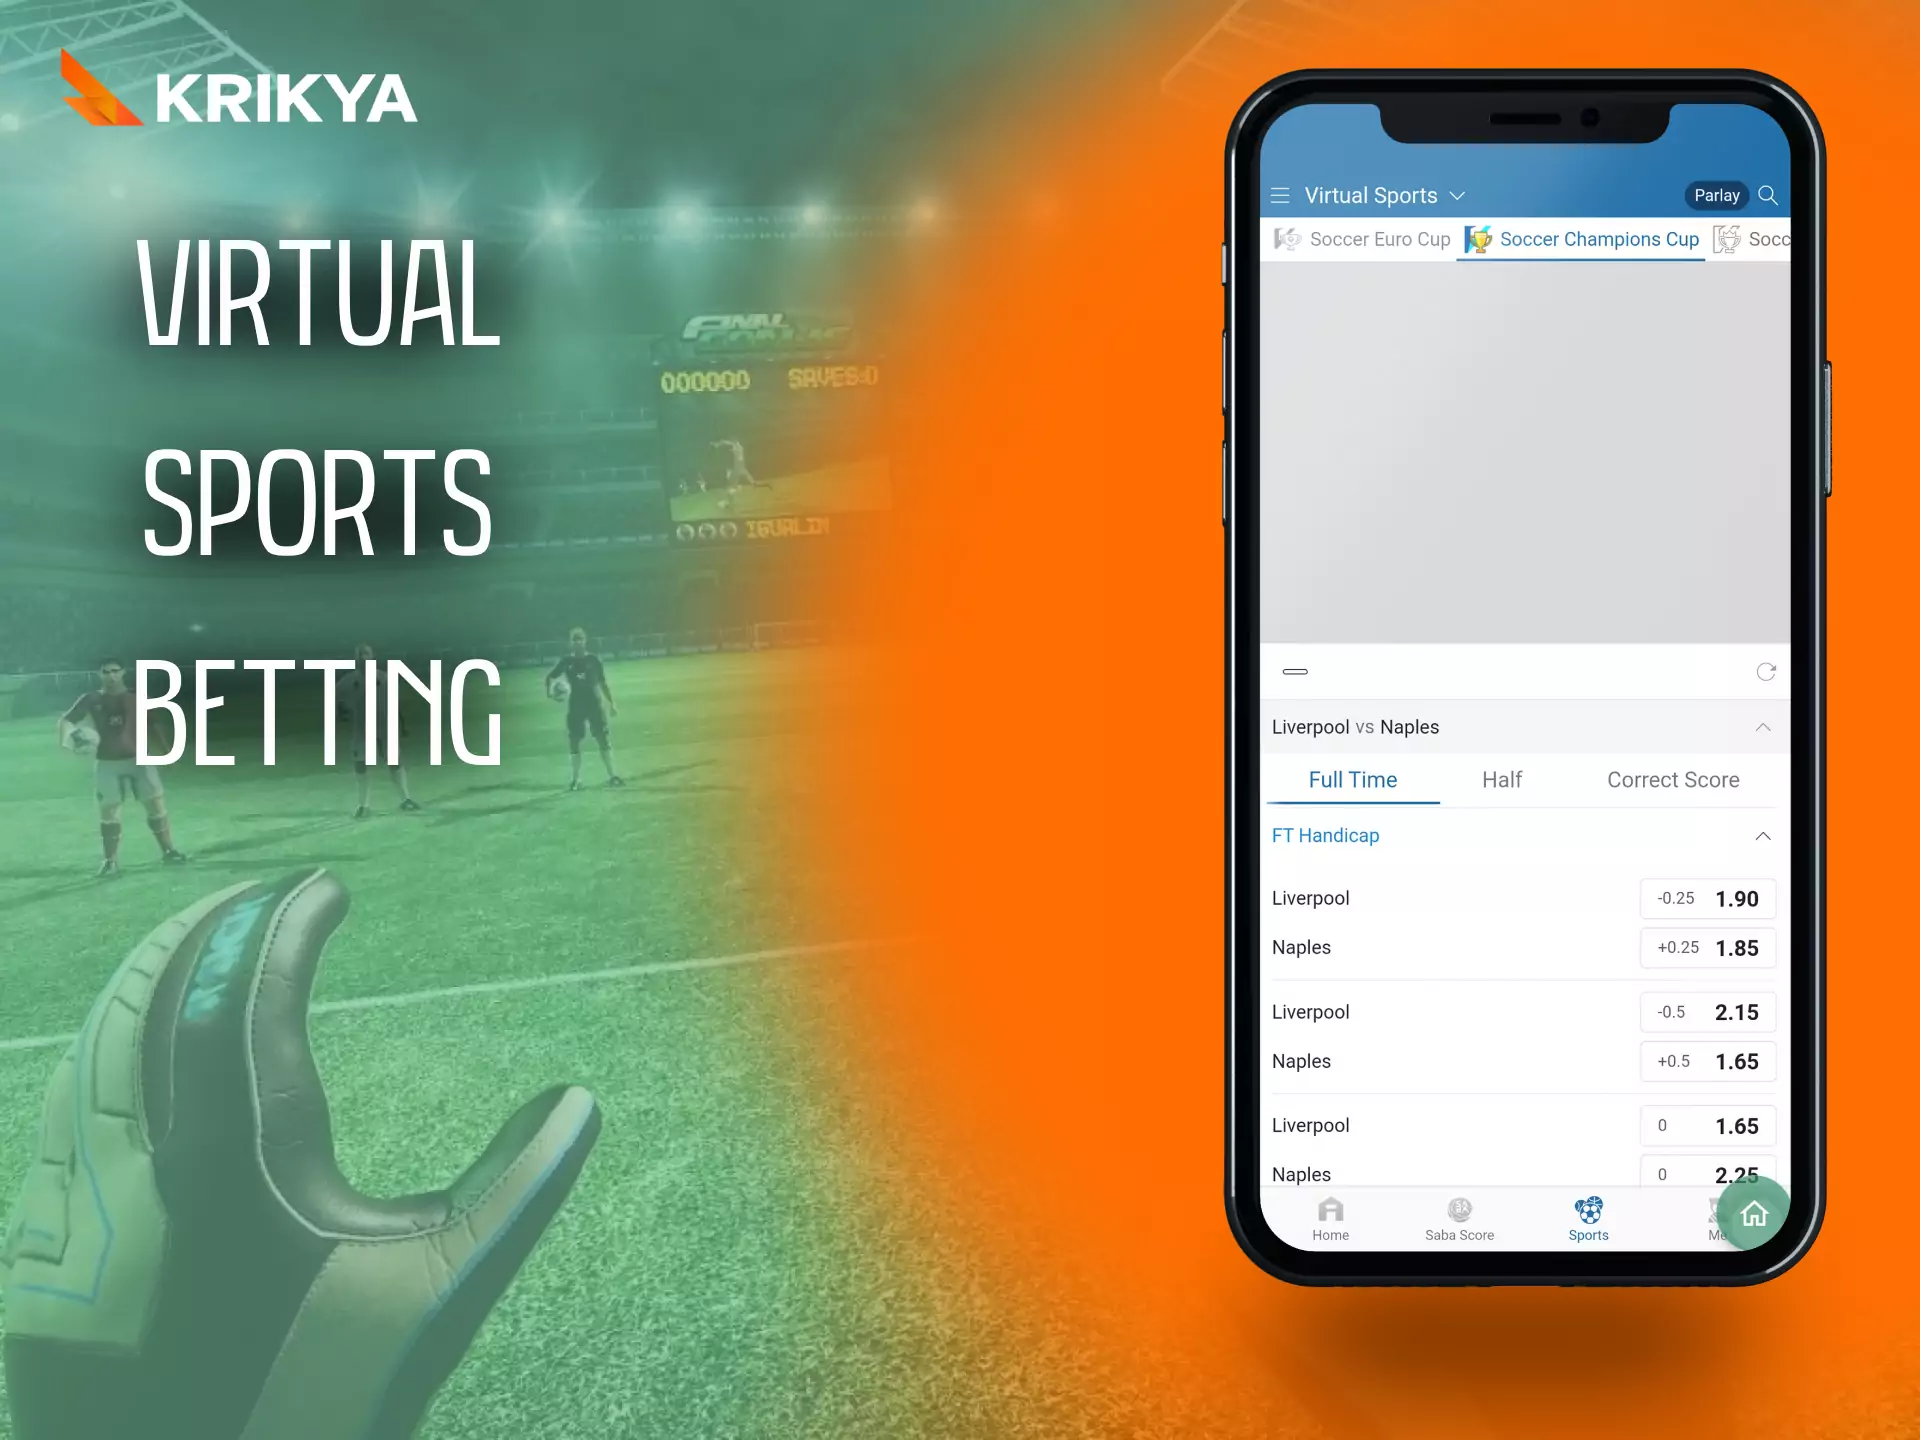 You can bet on any virtual sports in Krikya.